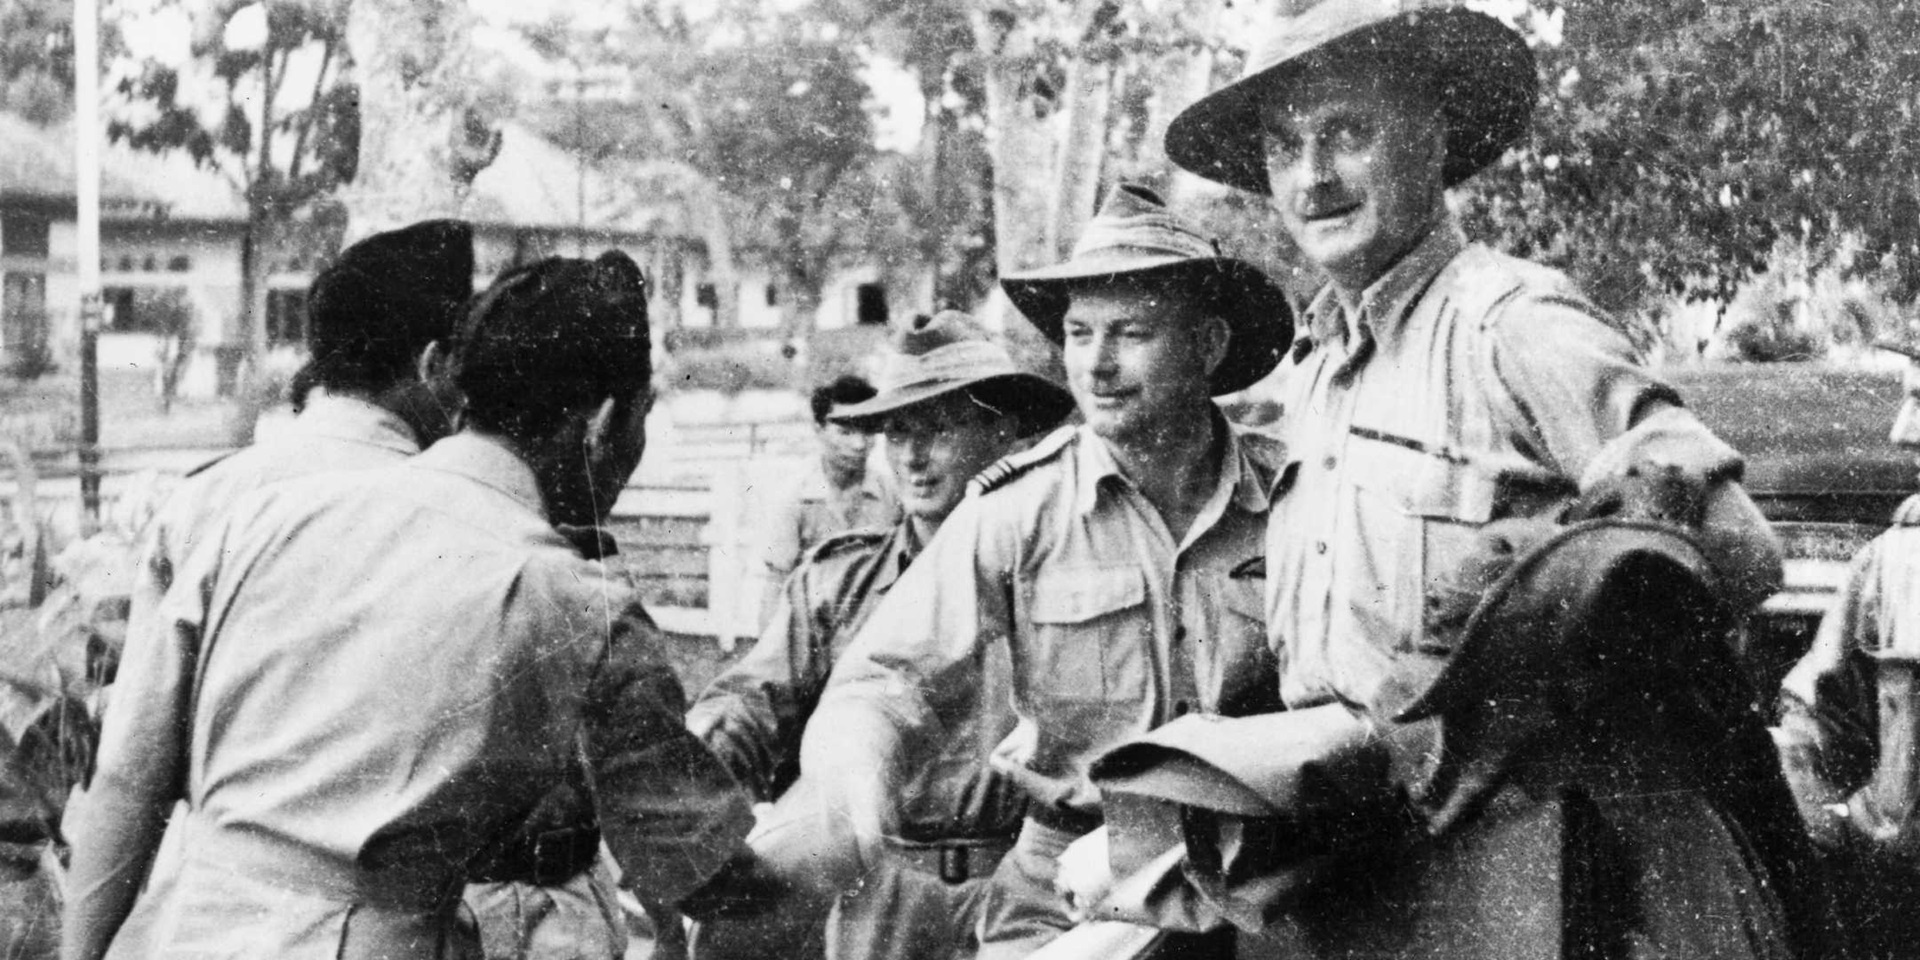 Australian military observers being welcomed by Republican officers in Yogyakarta on 14 September 1947. National Library of Australia.